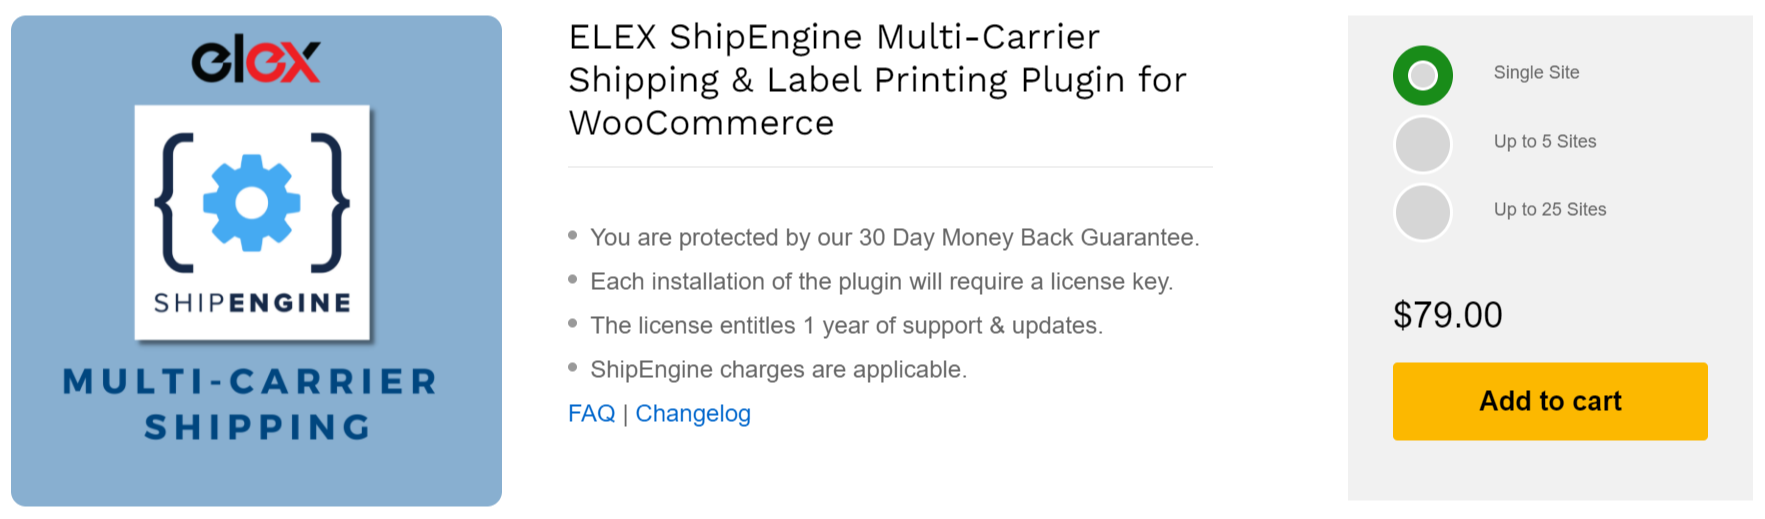 ELEX ShipEngine Multi-Carrier Shipping & Label Printing Plugin for WooCommerce